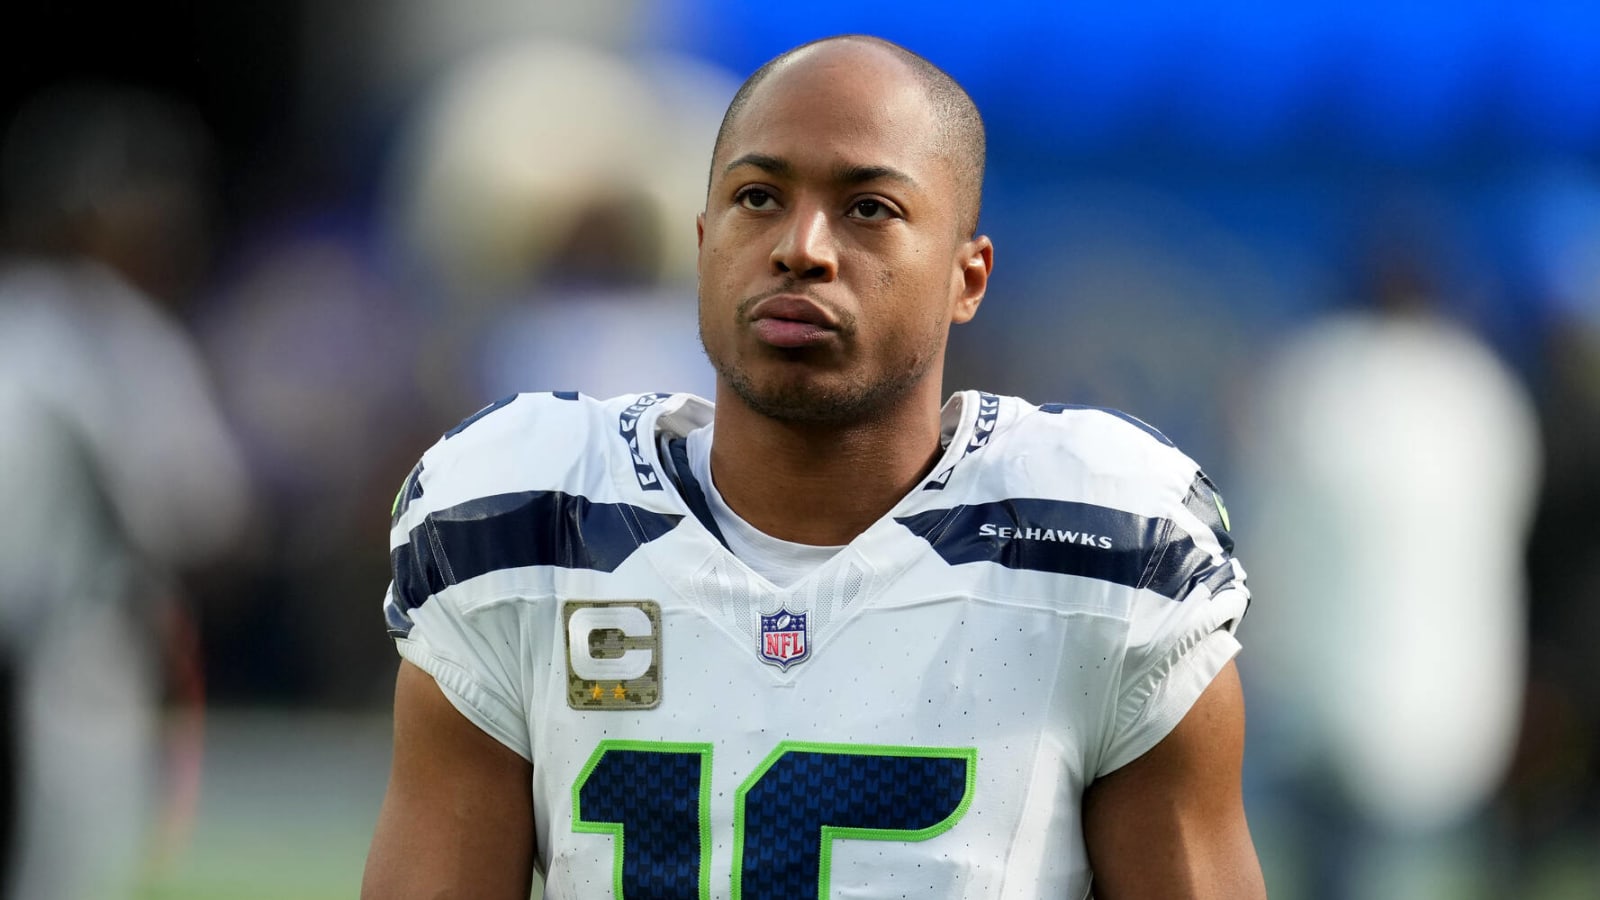 Seahawks agree to contract restructure with veteran leader